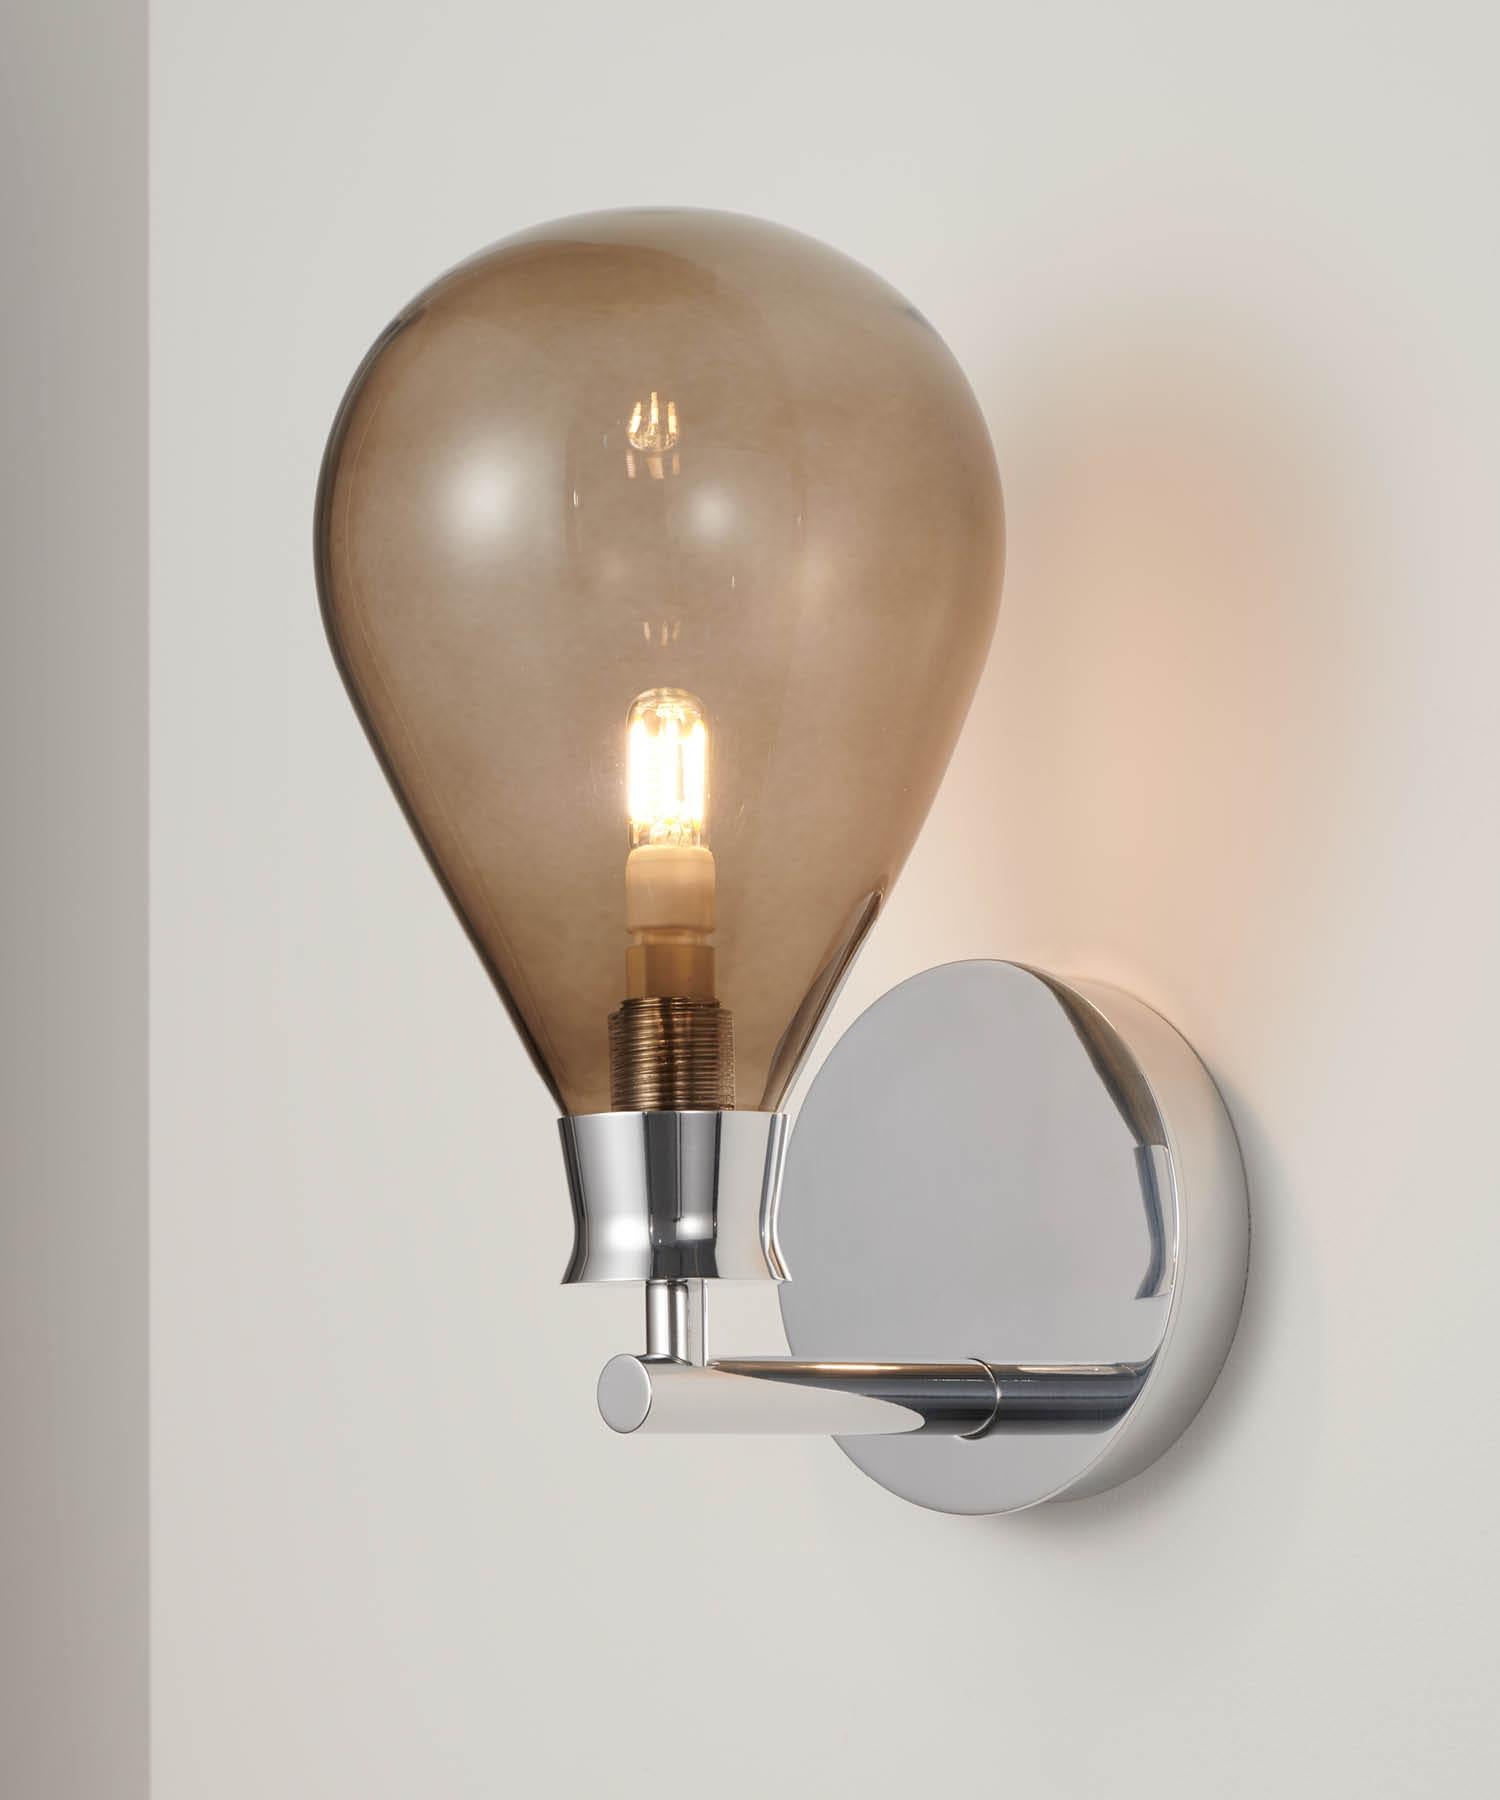 British Cintola Wall Light in Polished Aluminium with Bronze Handblown Glass Globe For Sale